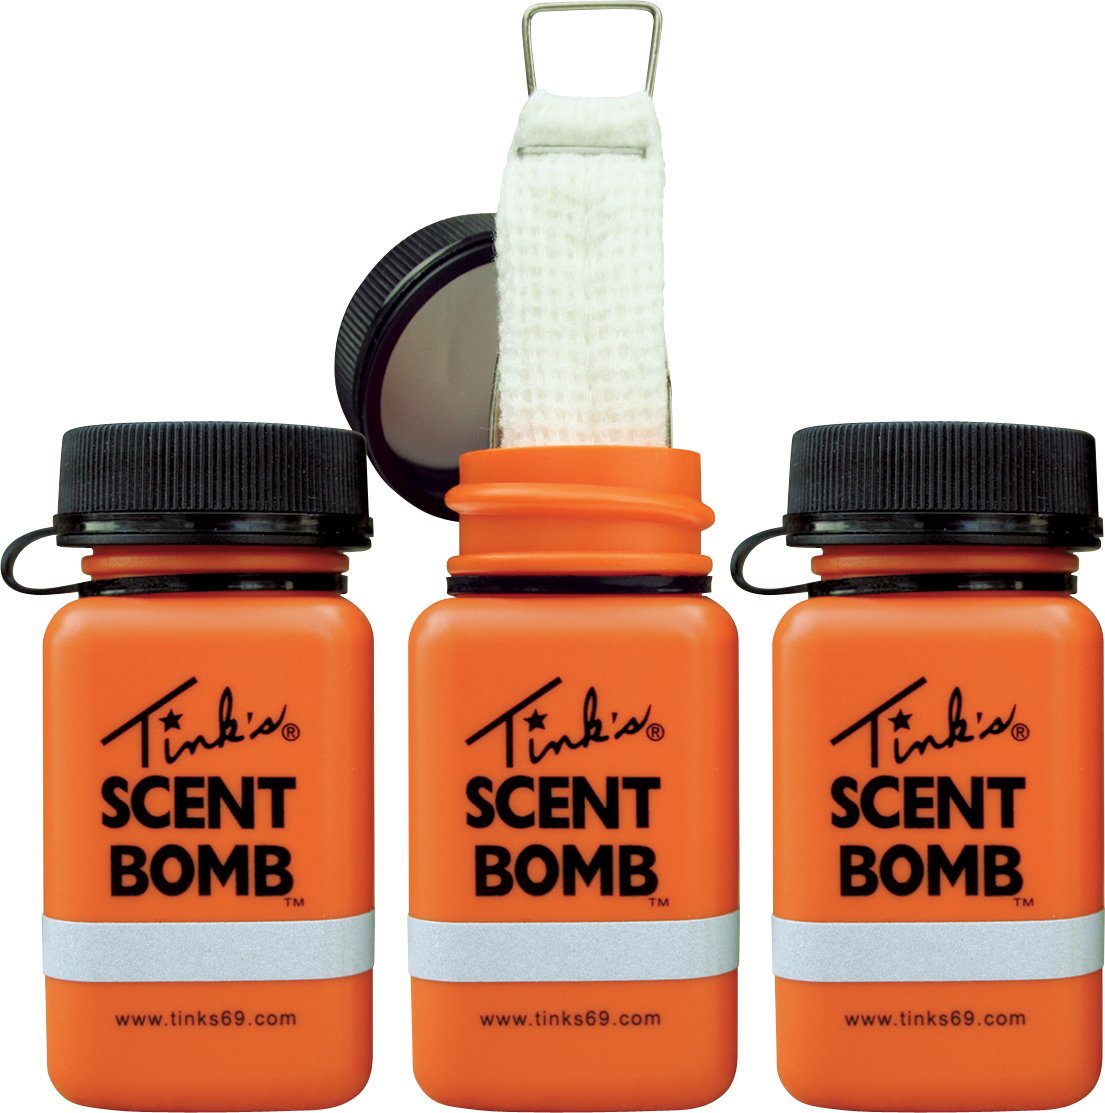 3-Pack TINK'S Scent Bombs 1 oz. $1.76 + Free Shipping w/ Prime or on $35+